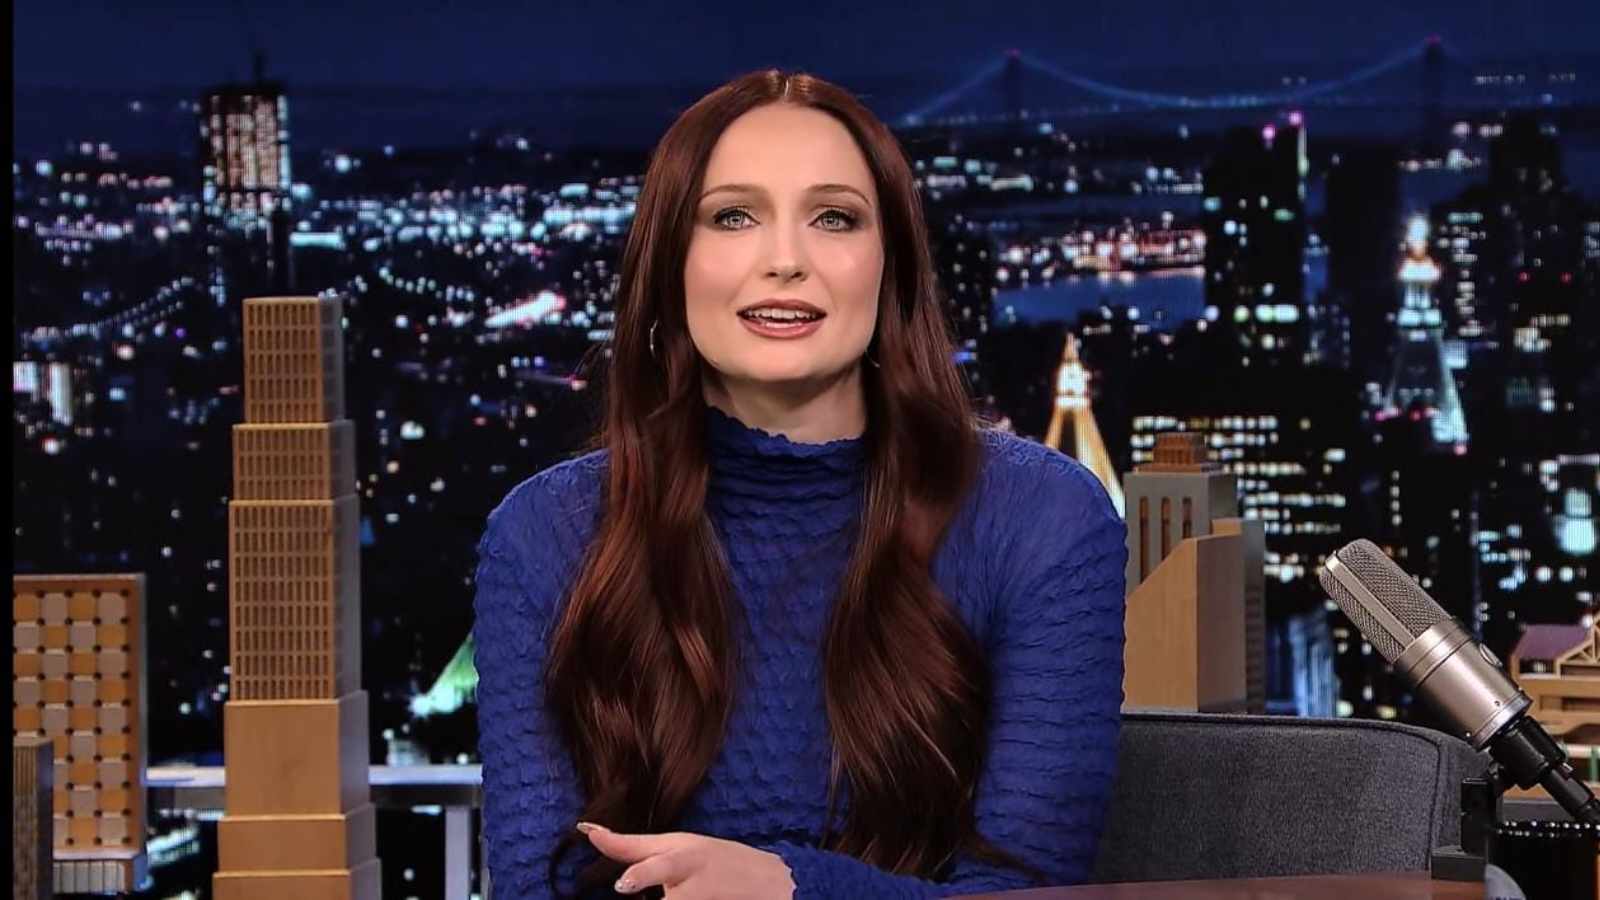 Sophie Turner on Jimmy Fallon's The Tonight Show